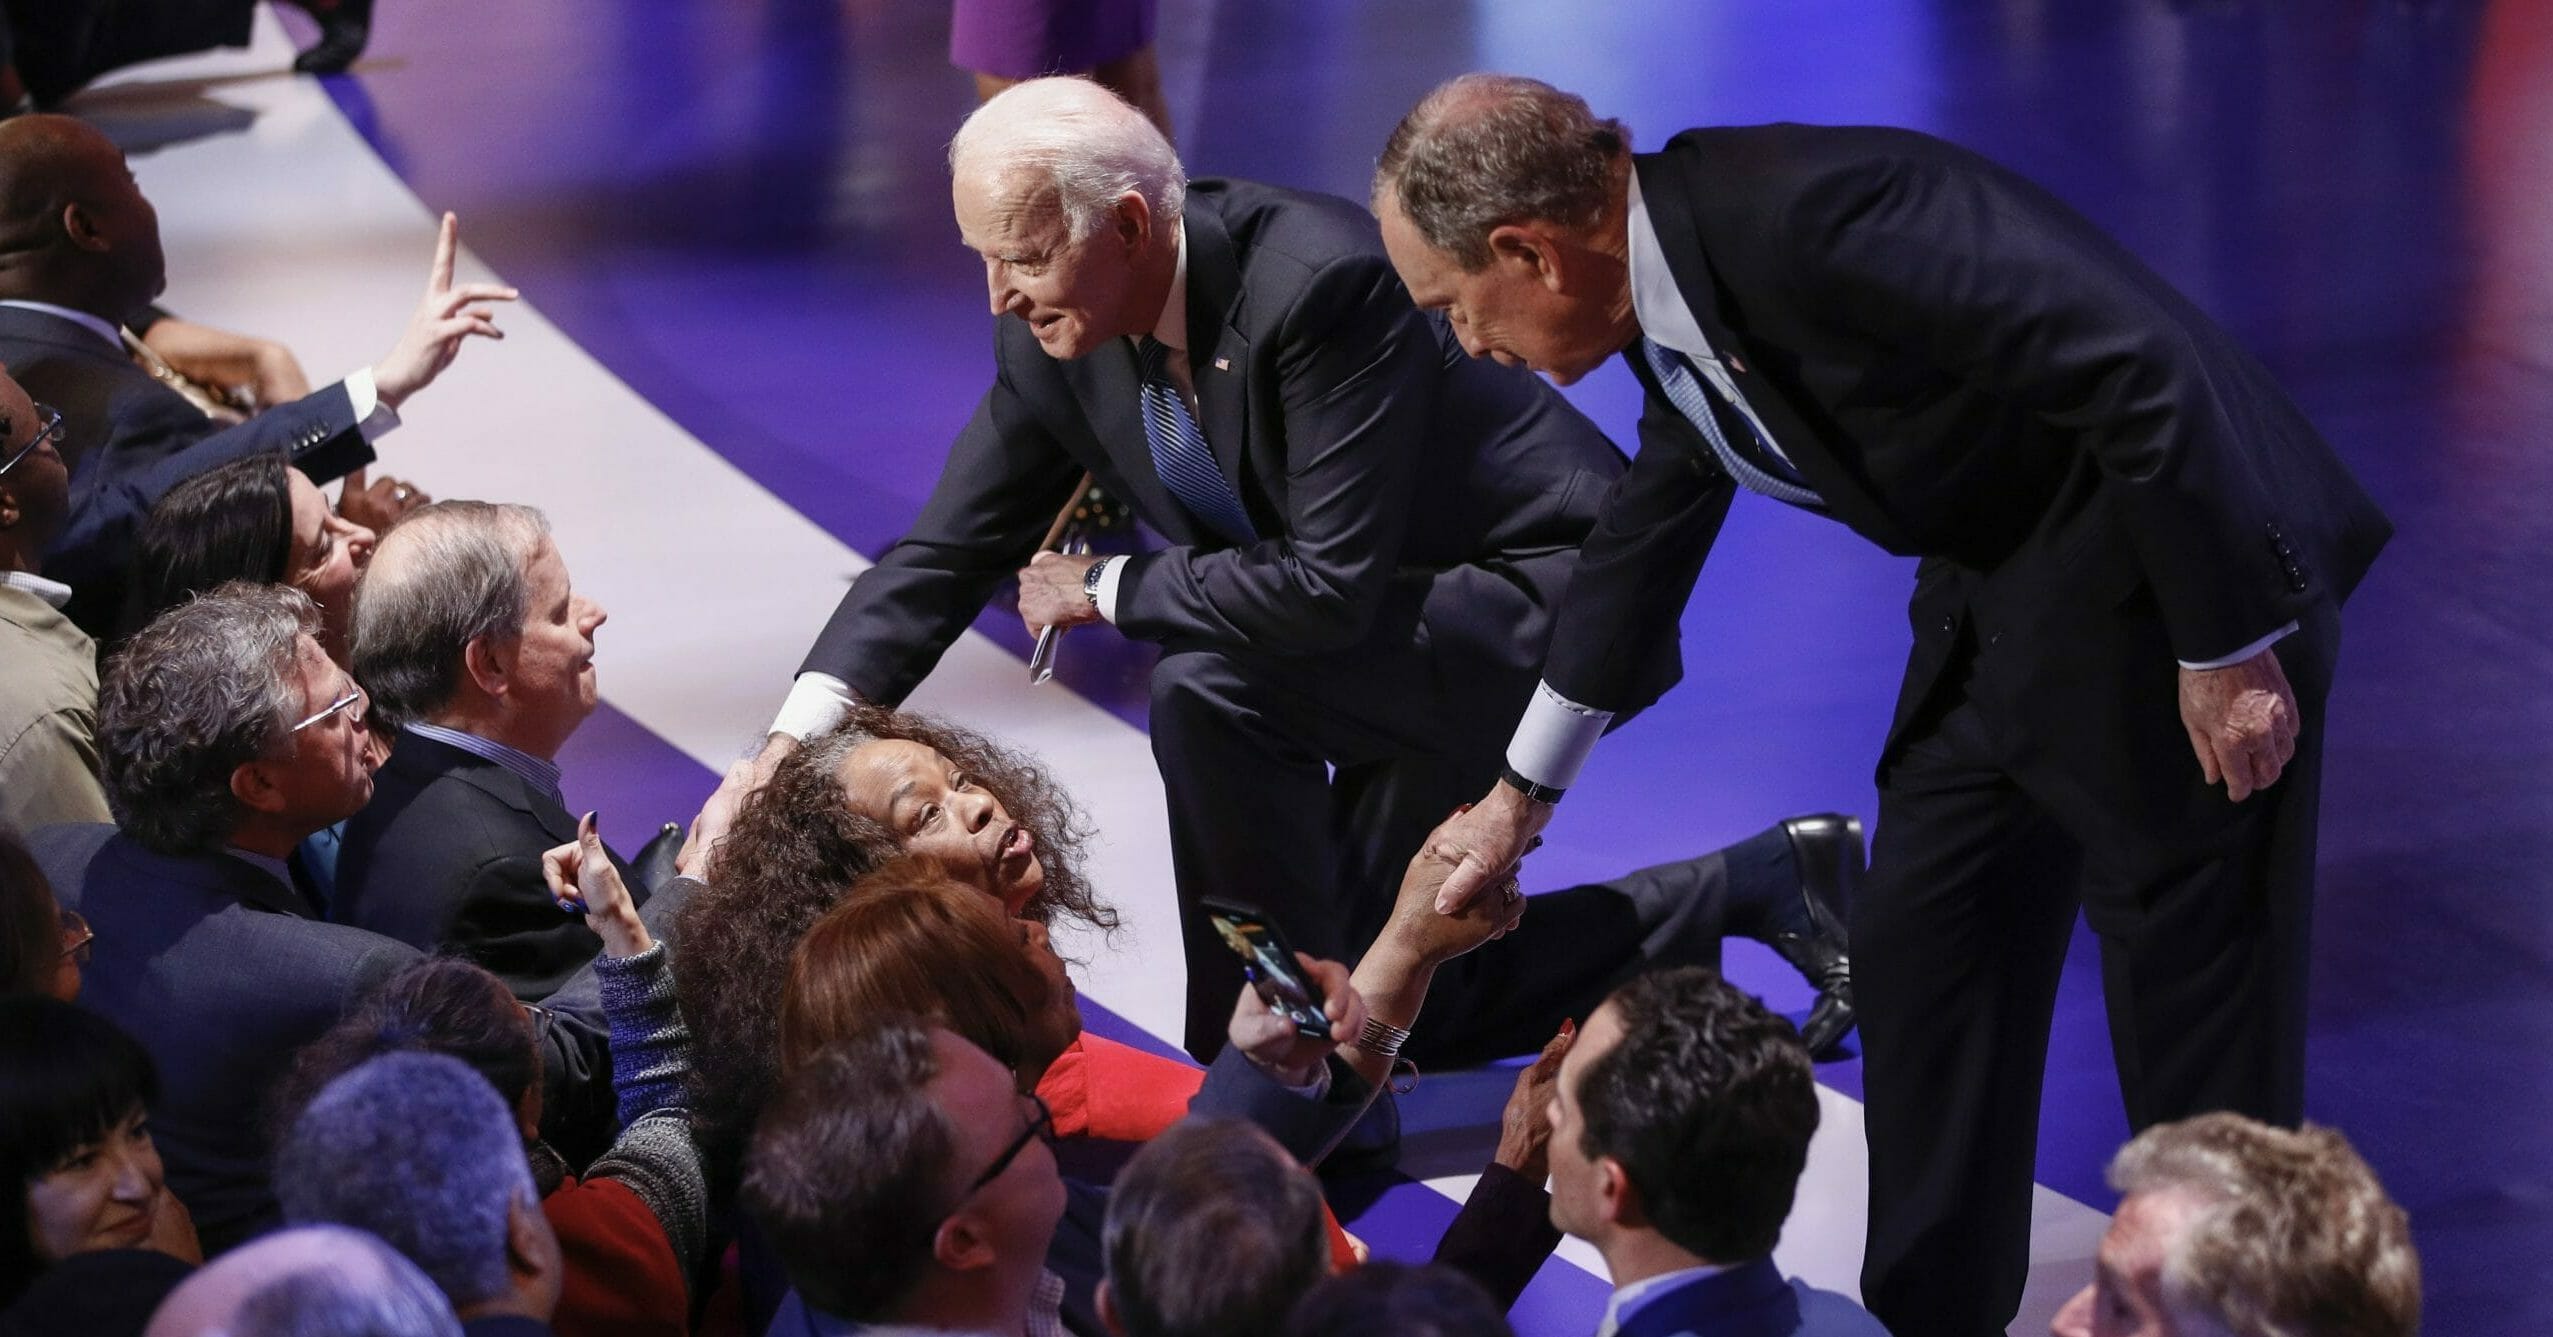 Democratic presidential candidates Mike Bloomberg, right, and Joe Biden greet supporters at the end of the Democratic primary debate at the Gaillard Center in Charleston, South Carolina, on Feb. 25, 2020.